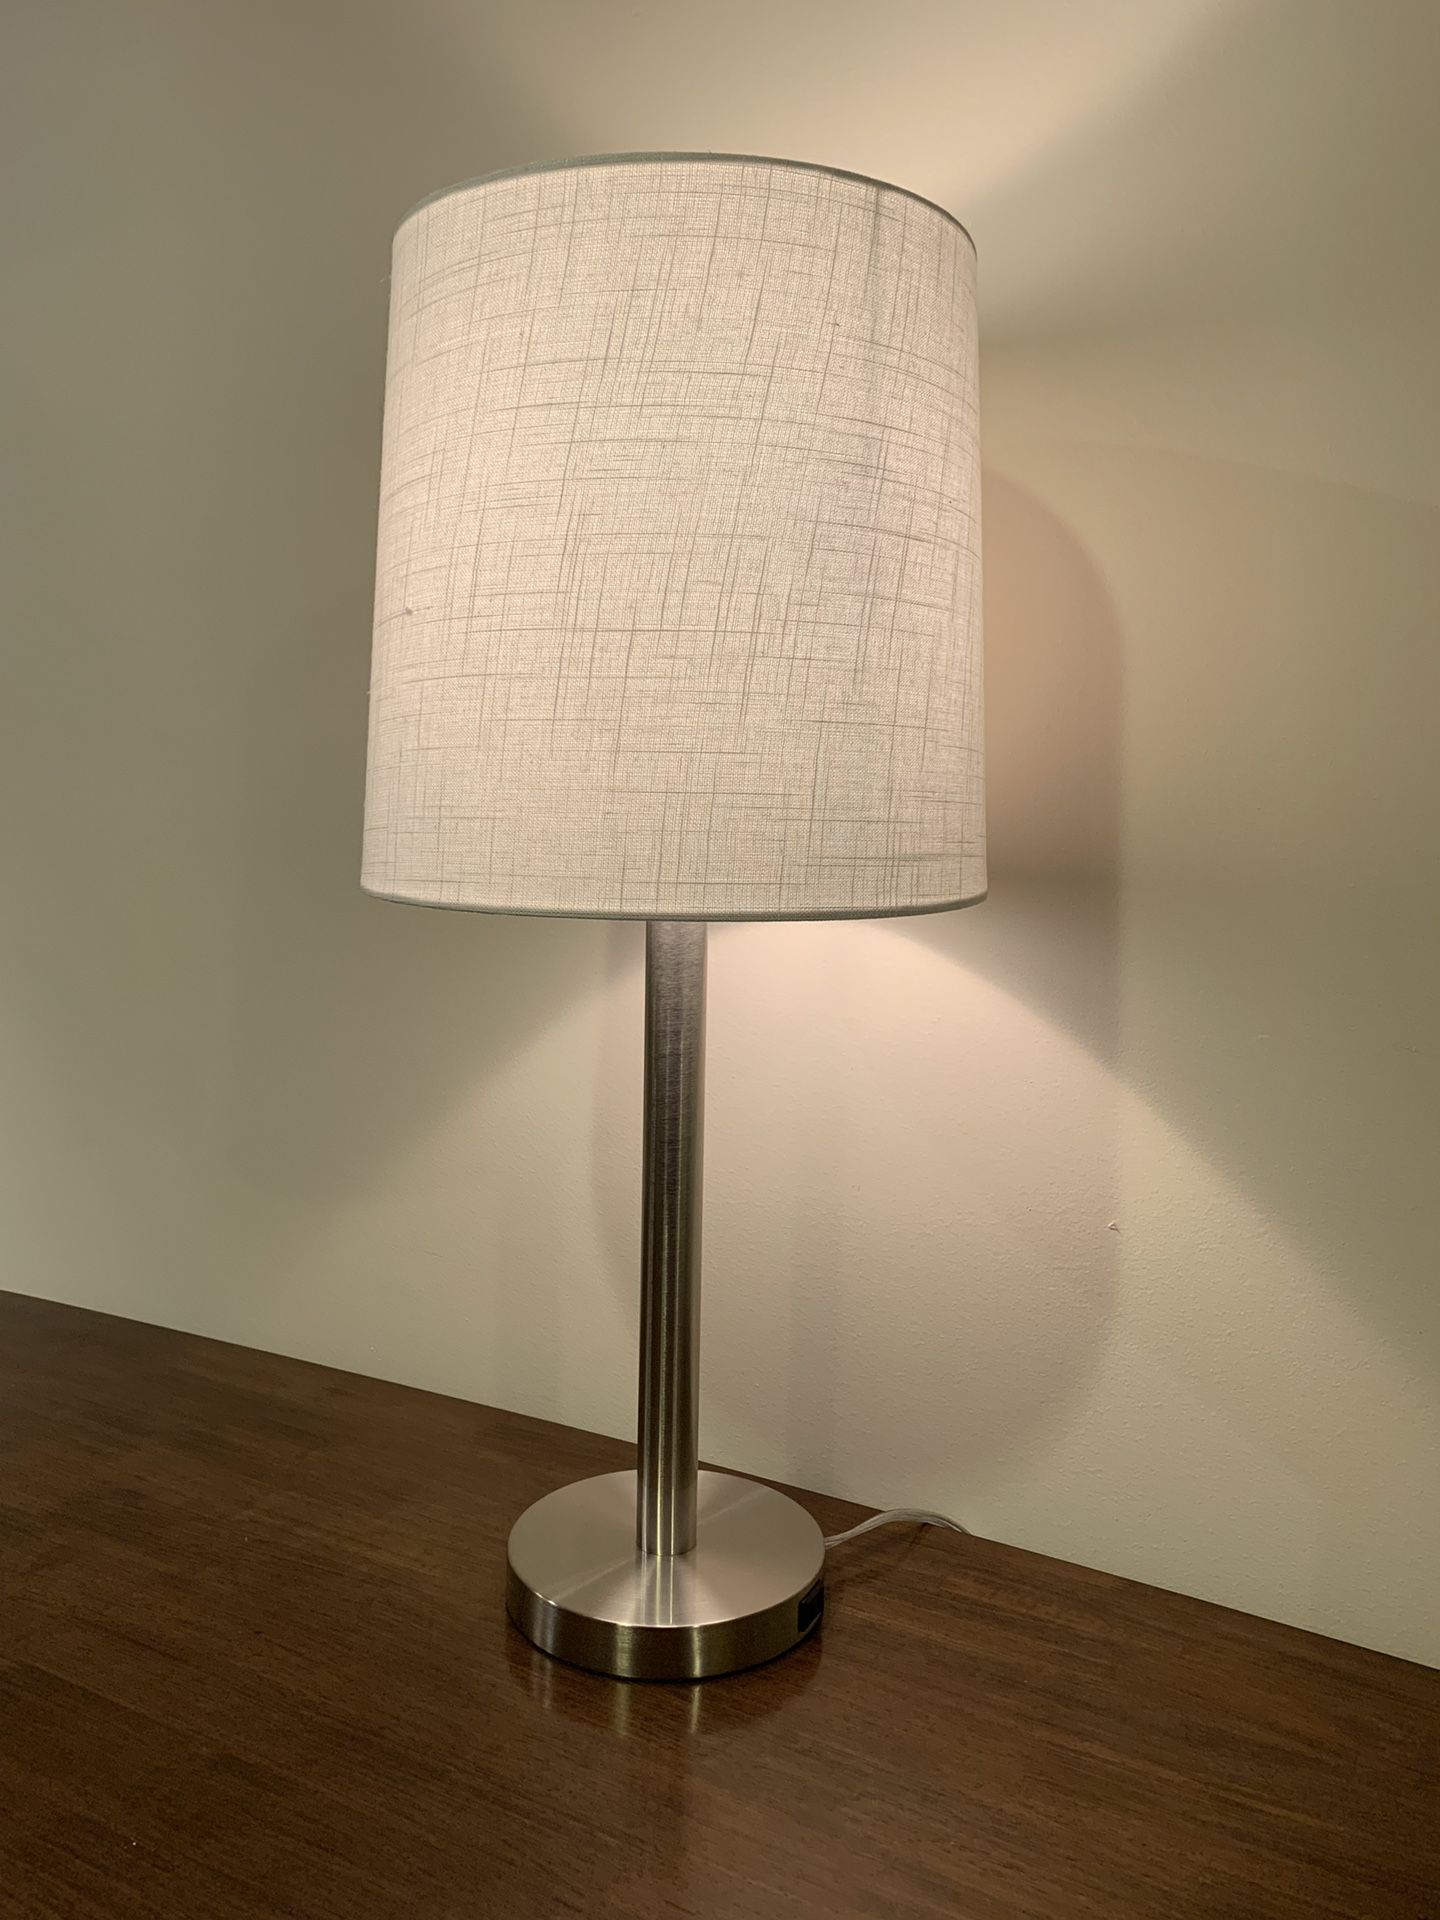 White & silver 3 way touch lamp